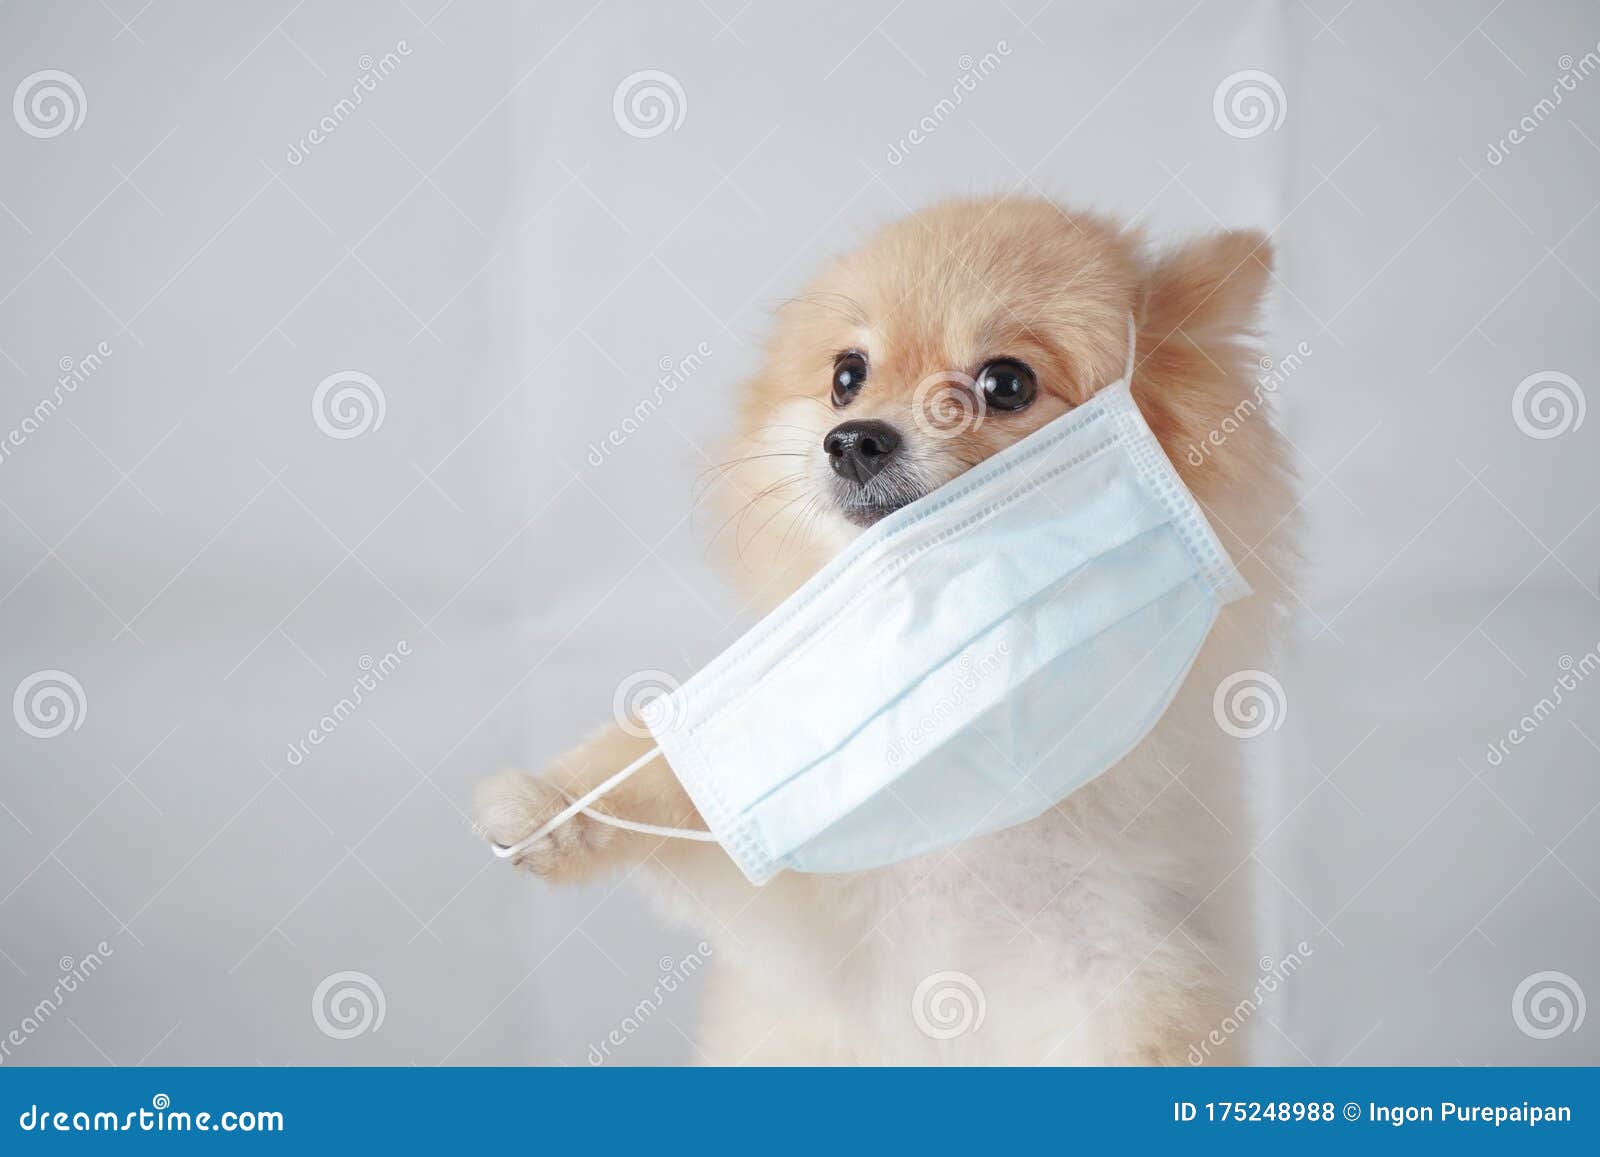 Dog Breed or Pomeranian with Light Brown Hair Sitting and Wearing a Anti PM2.5 Mask with White Background. Stock Photo - Image fresh, 175248988